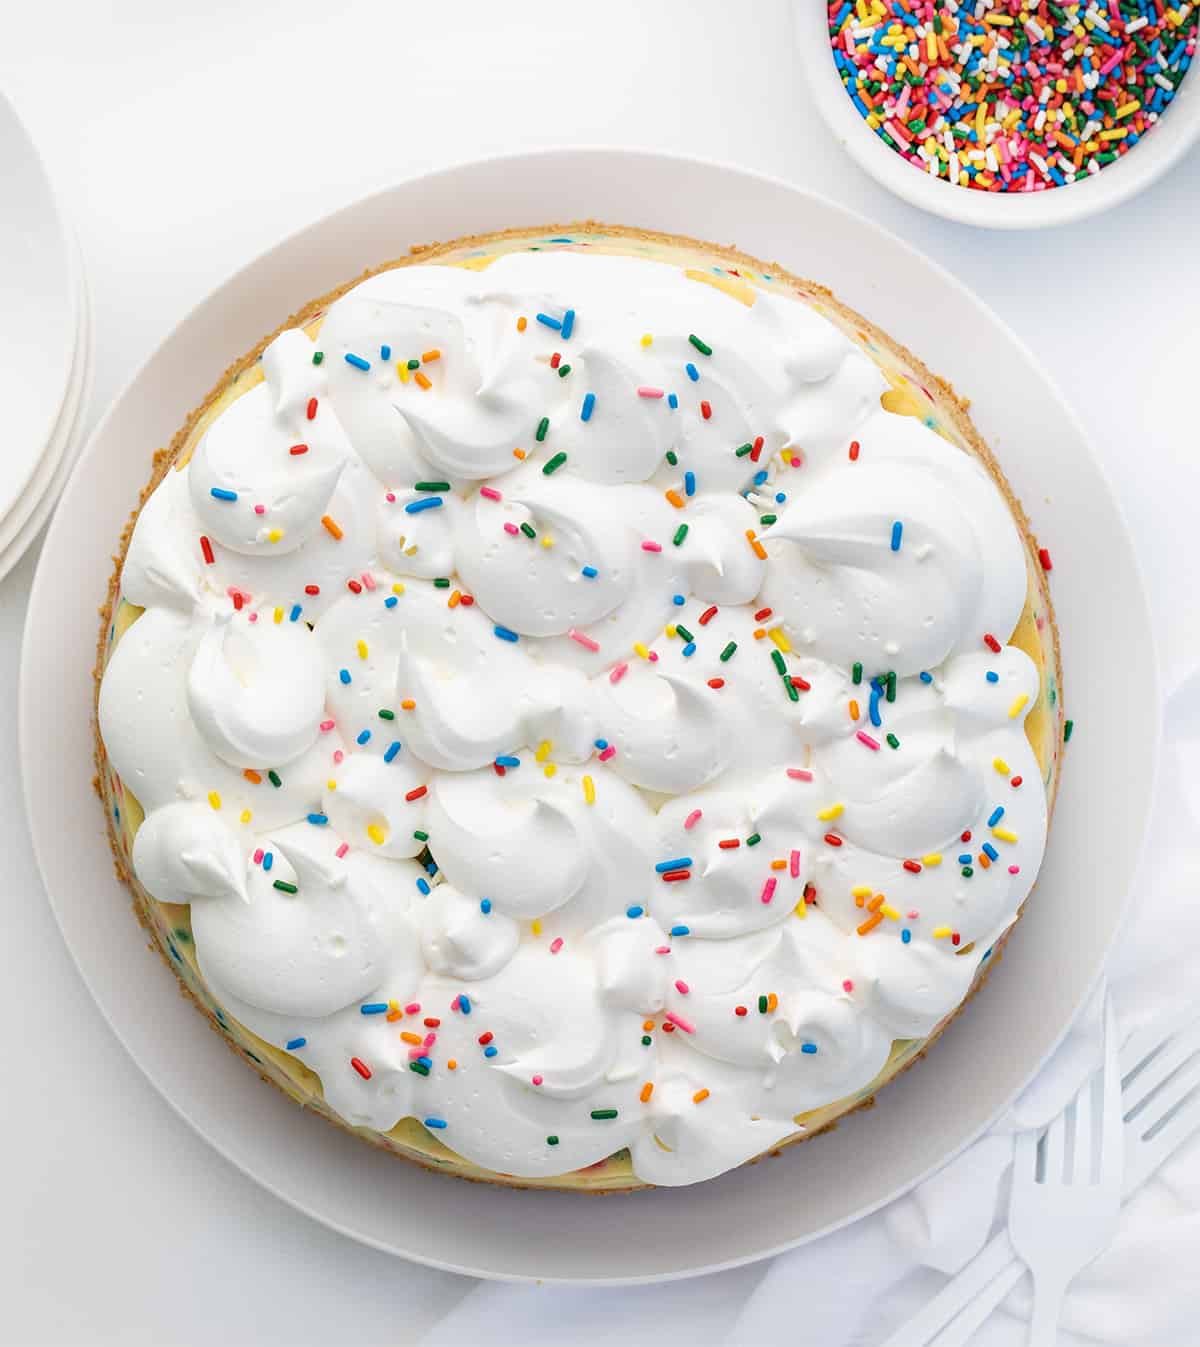 Overhead image of a Birthday Cheesecake Showing the Whipped Topping Dollops Covered in Sprinkles on a White Counter.